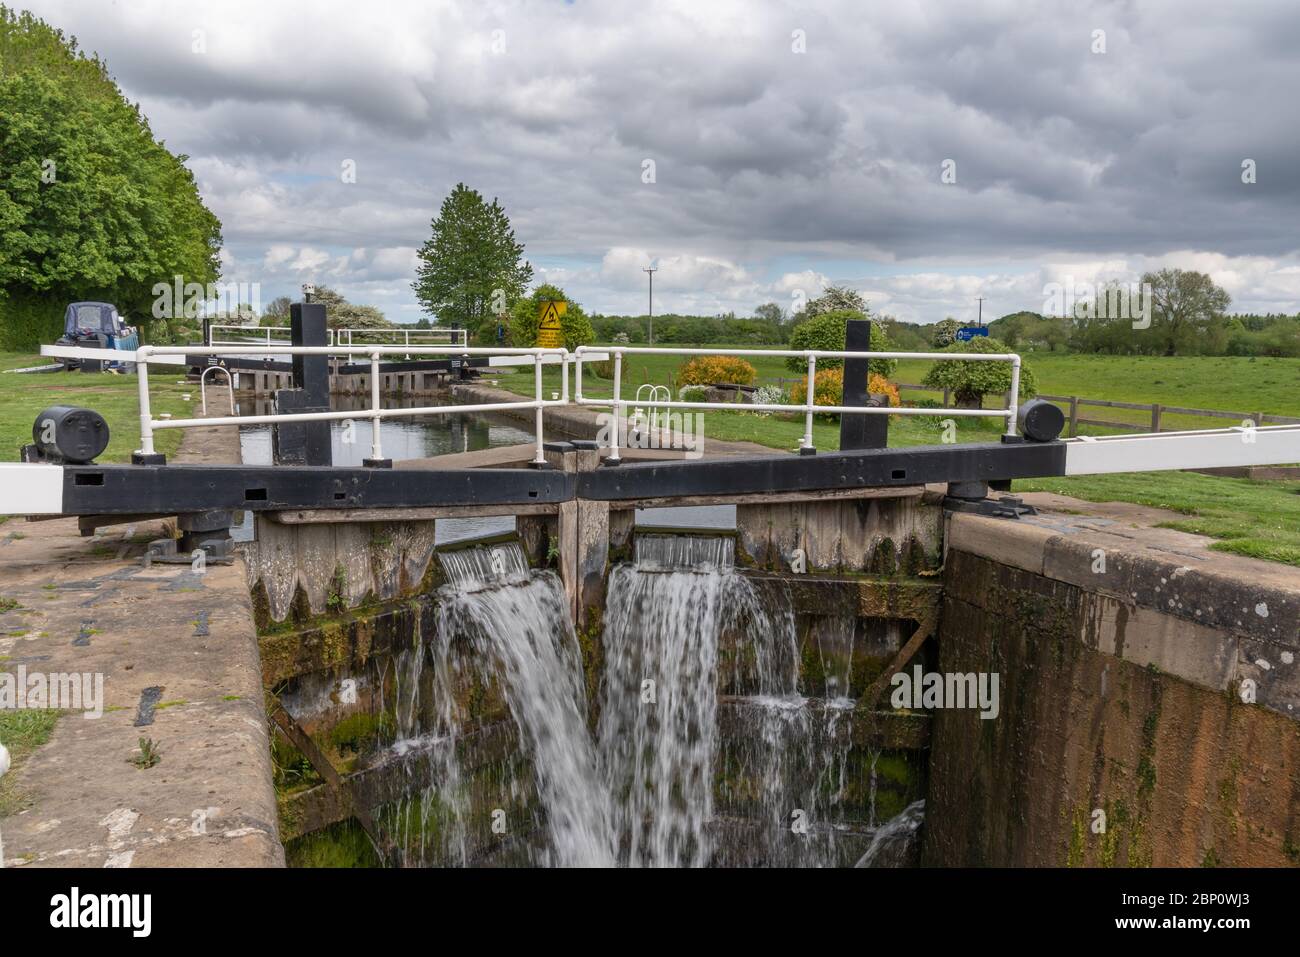 Water flowing from lock gates on a canal Stock Photo